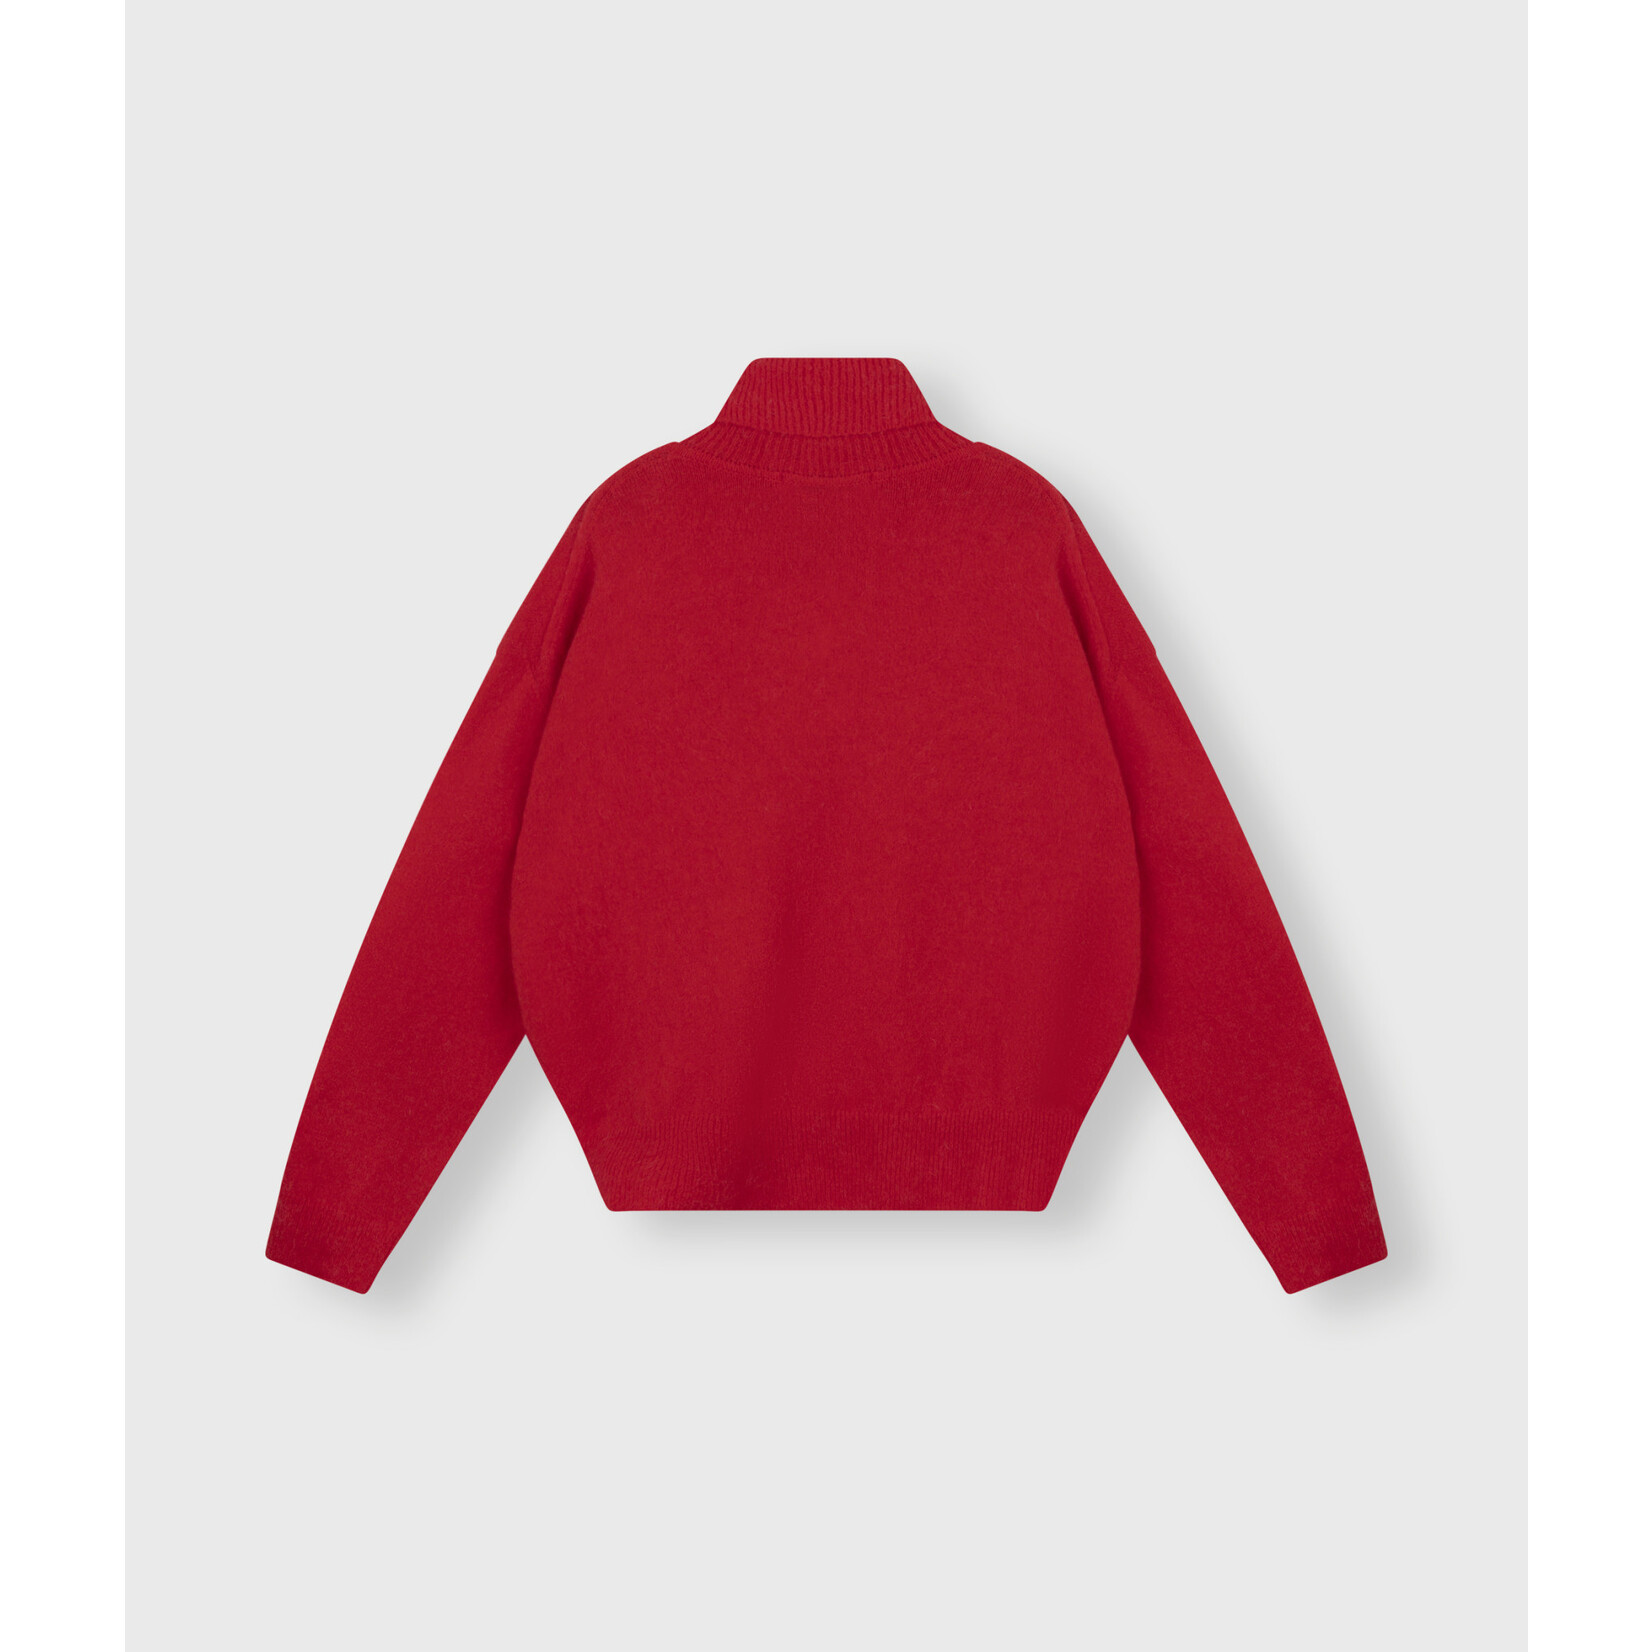 10Days Coll sweater knit Coral red